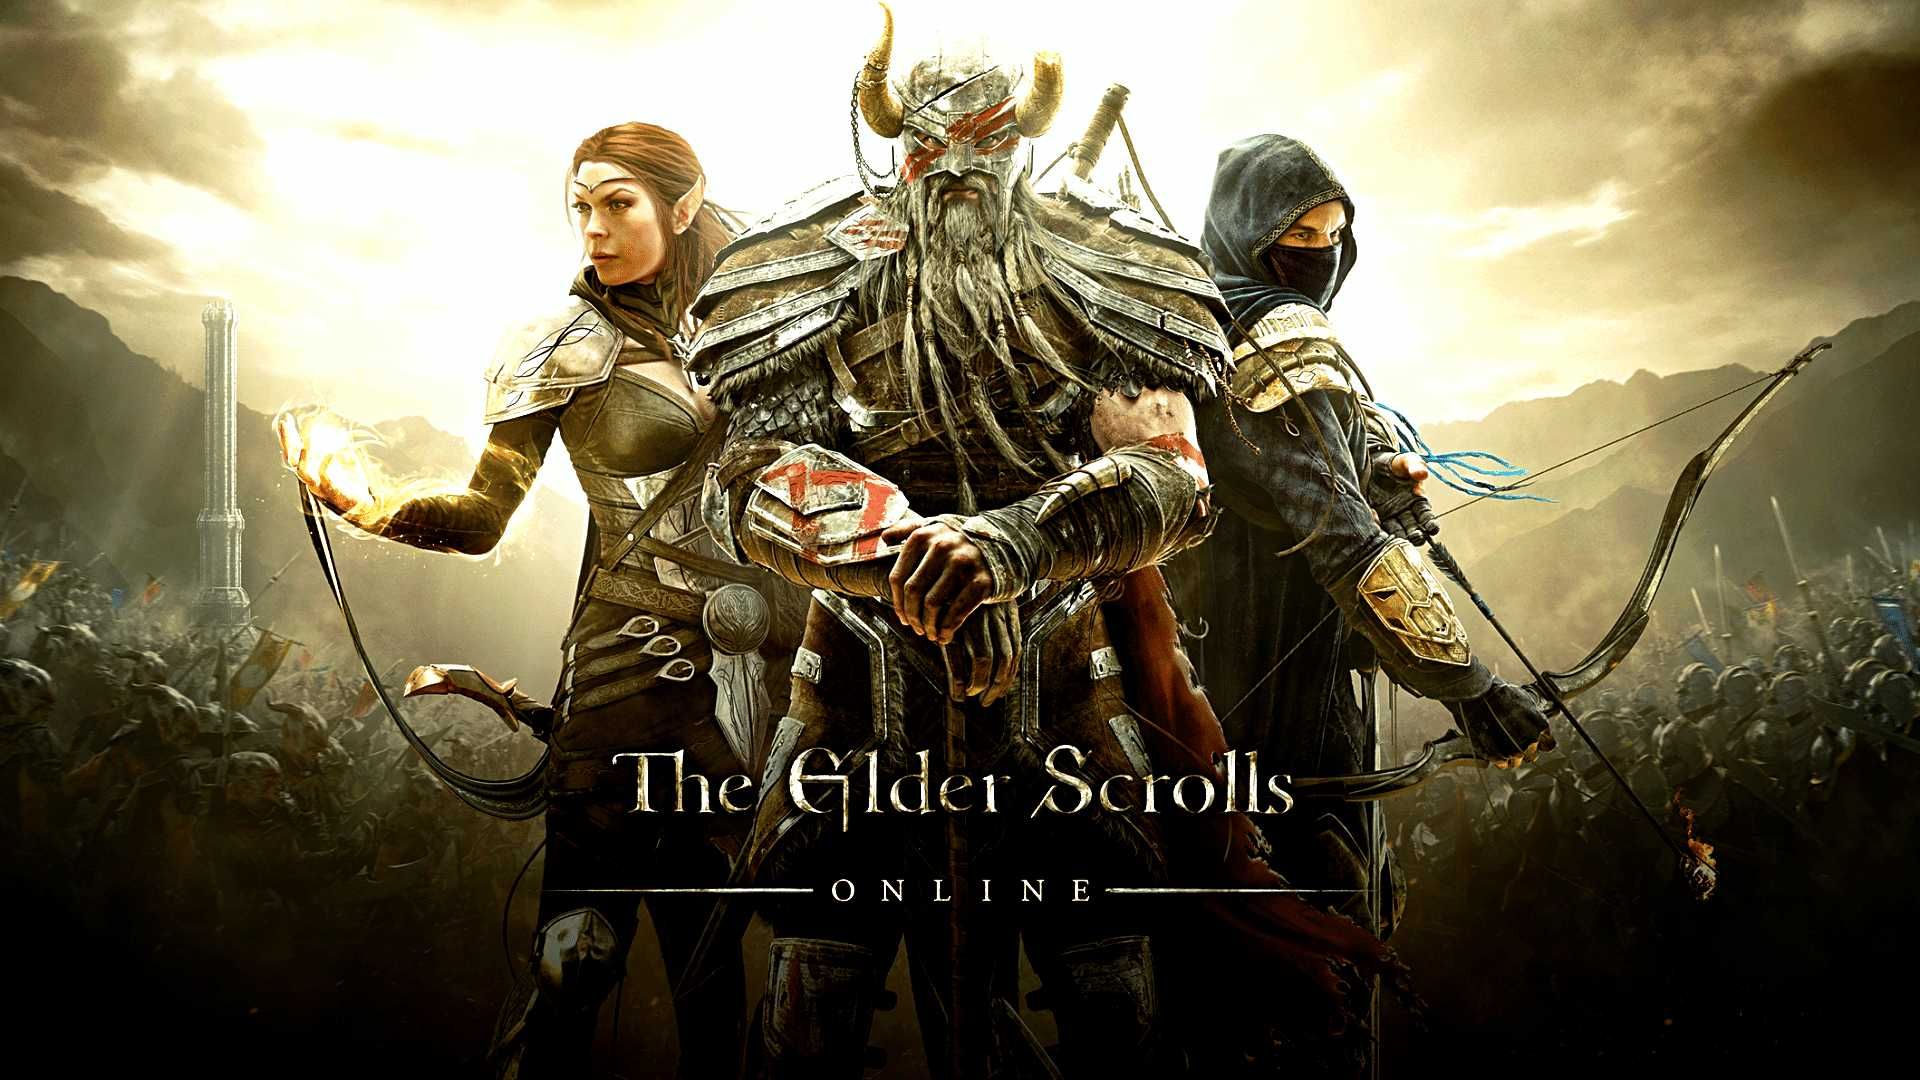 The Elder Scrolls Online + Evil Within + Guardians of the Galaxy 3in1